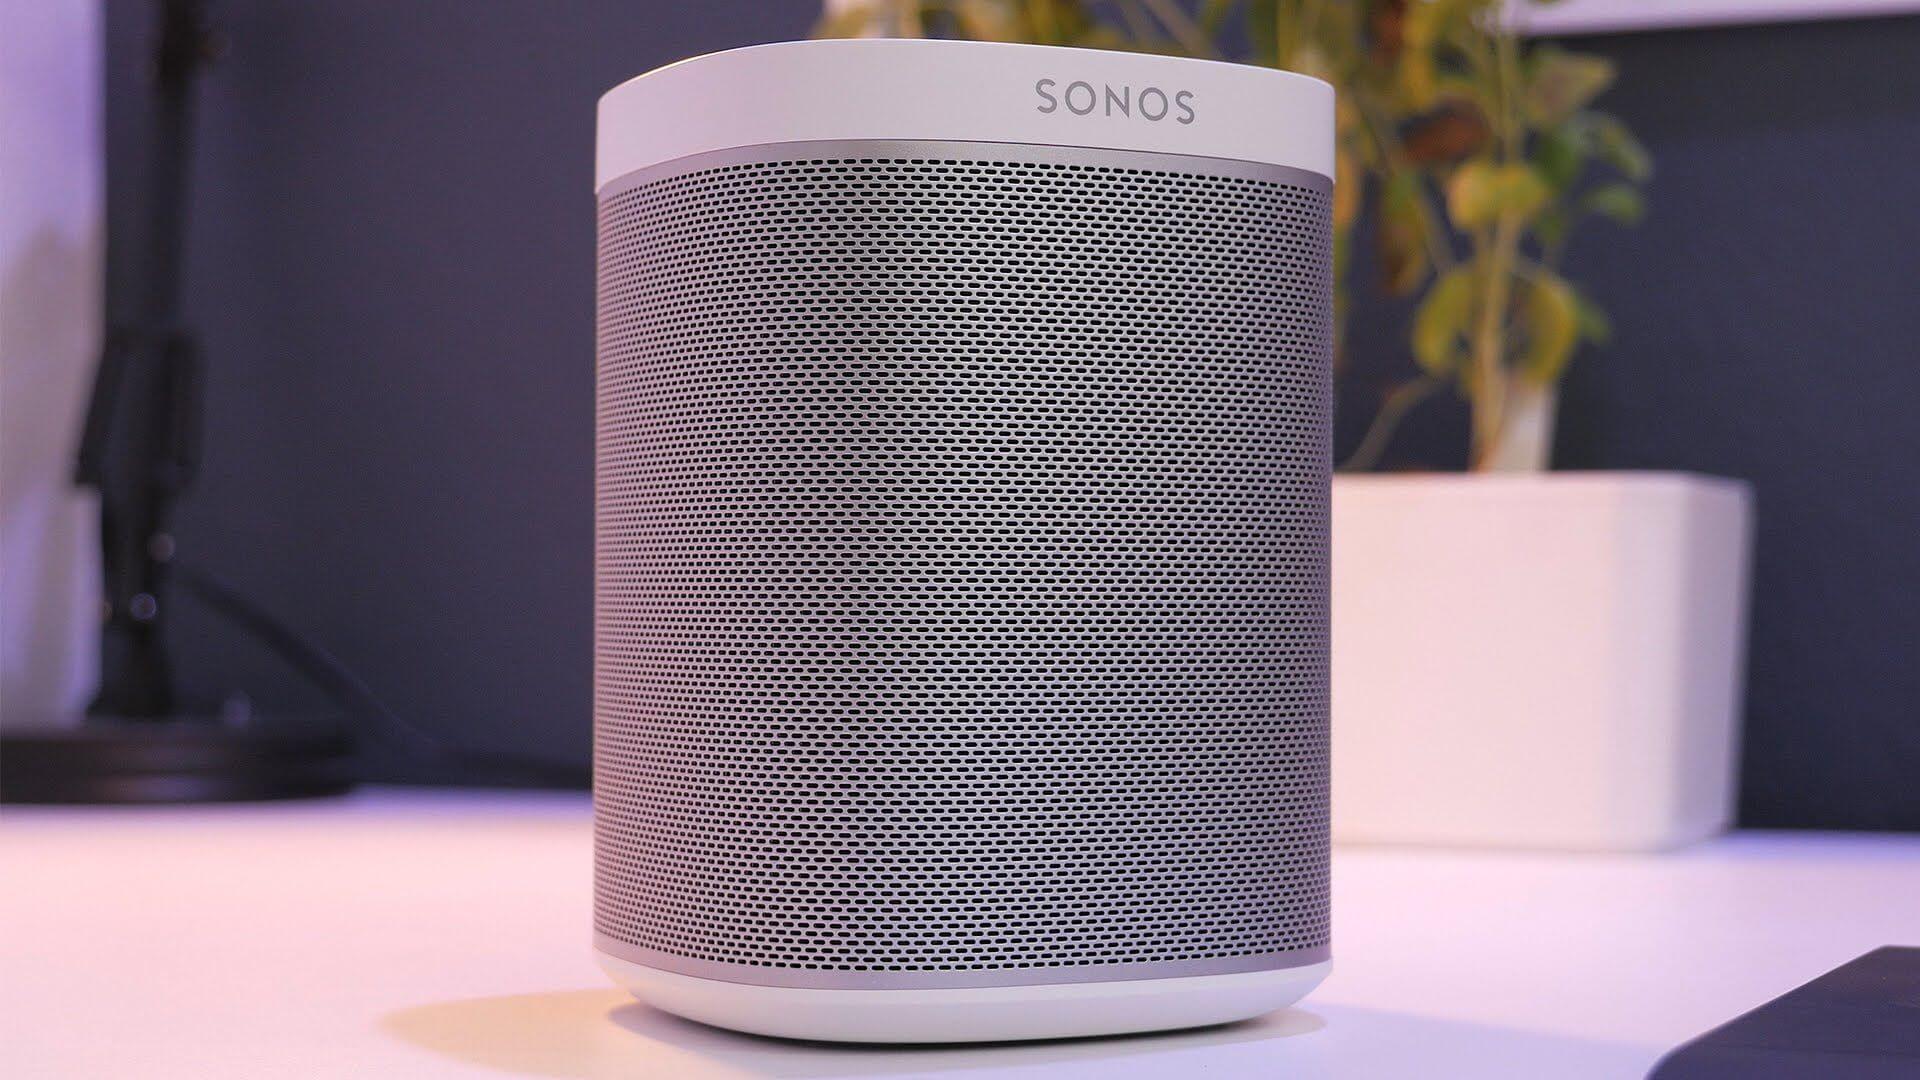 Sonos is expanding beyond surround sound and smart speakers